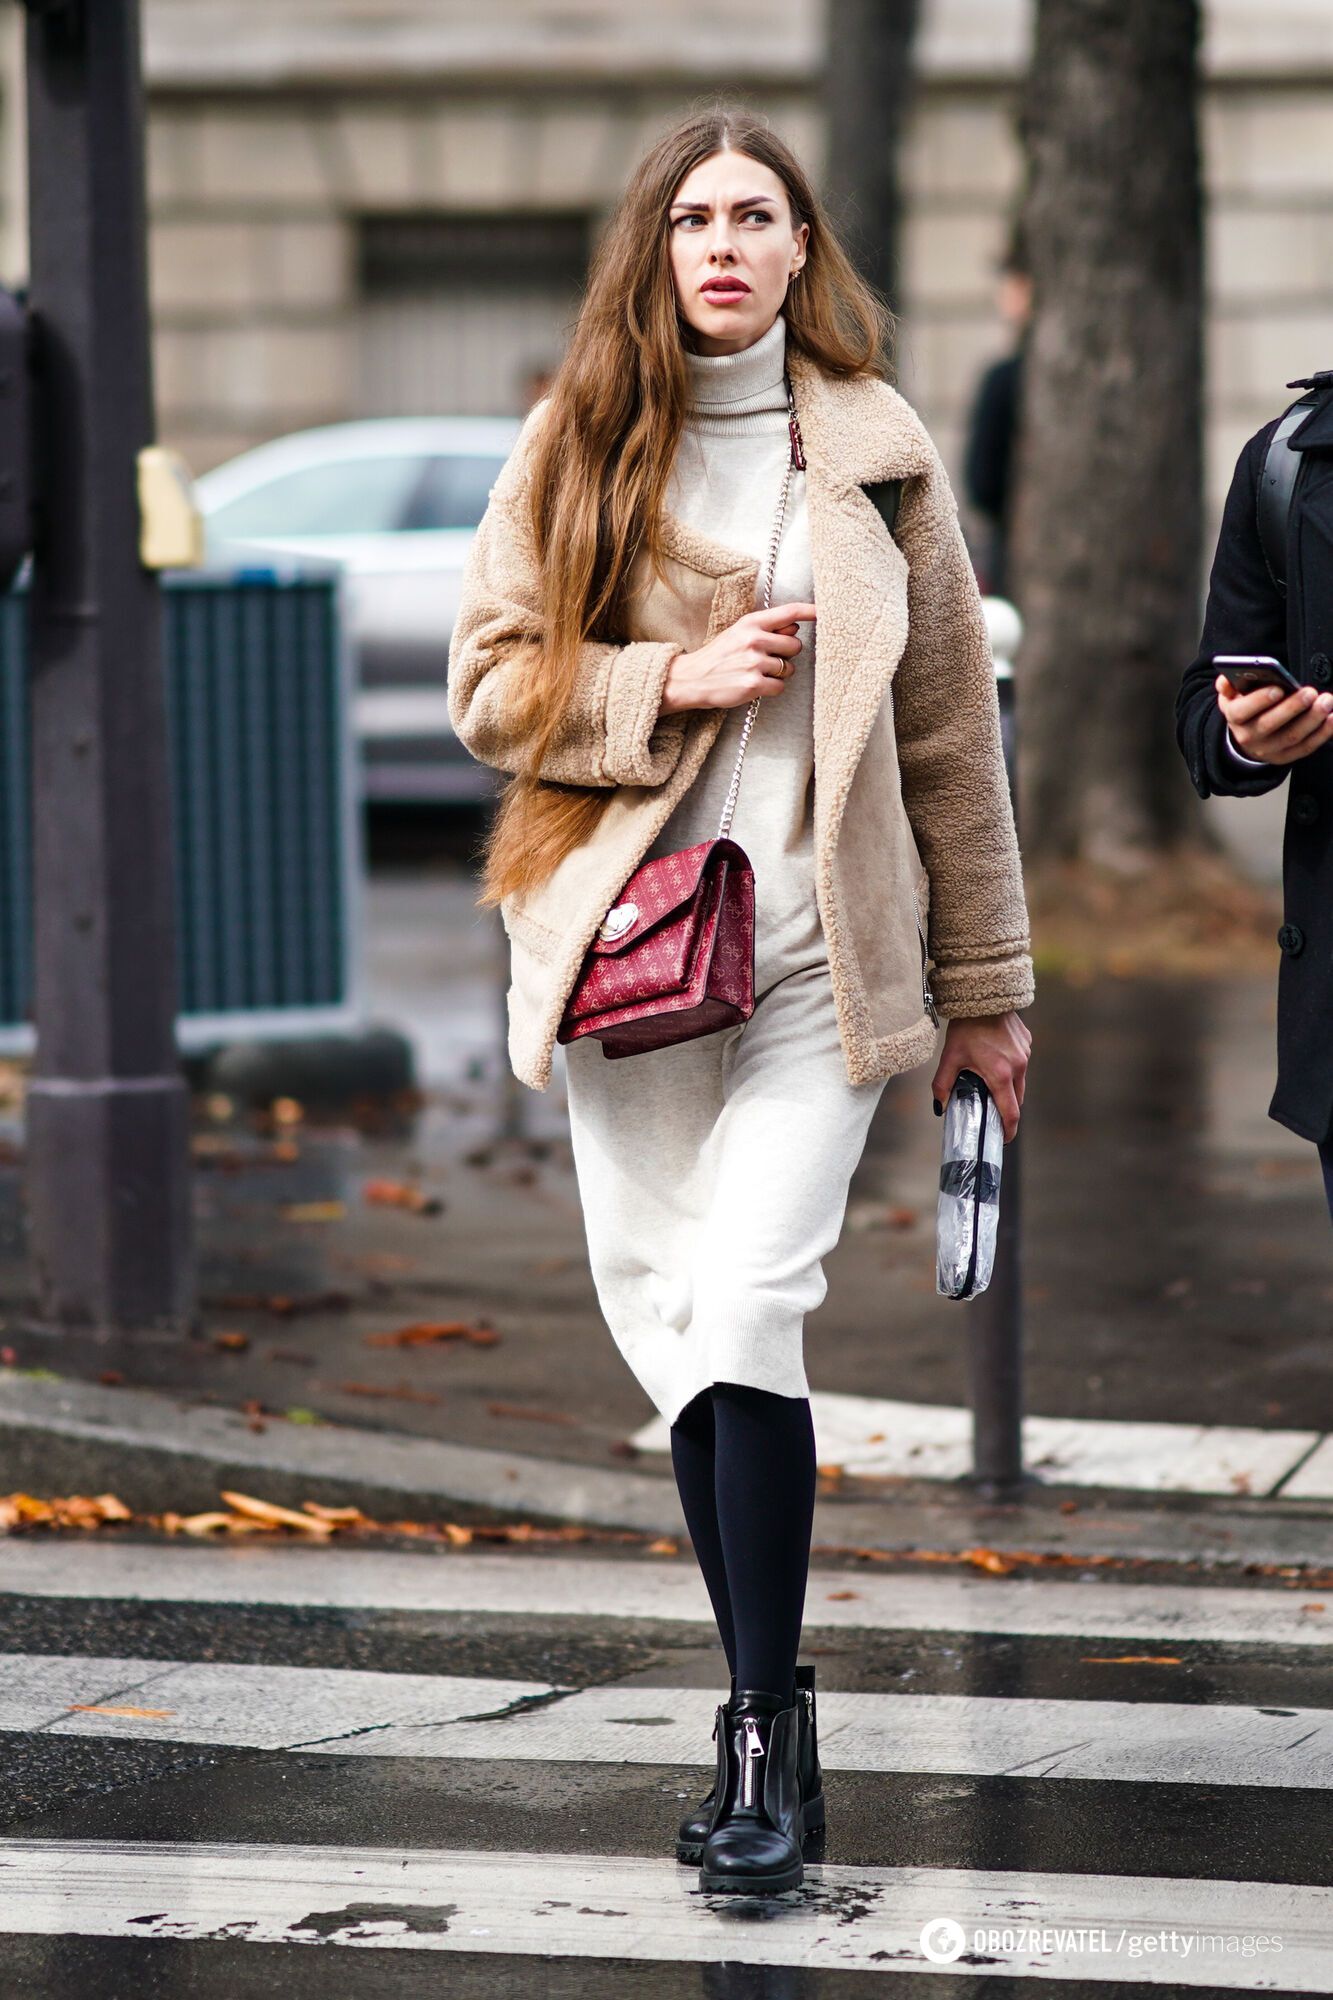 Forget the cold: 5 stylish ideas for replacing nylon tights in winter